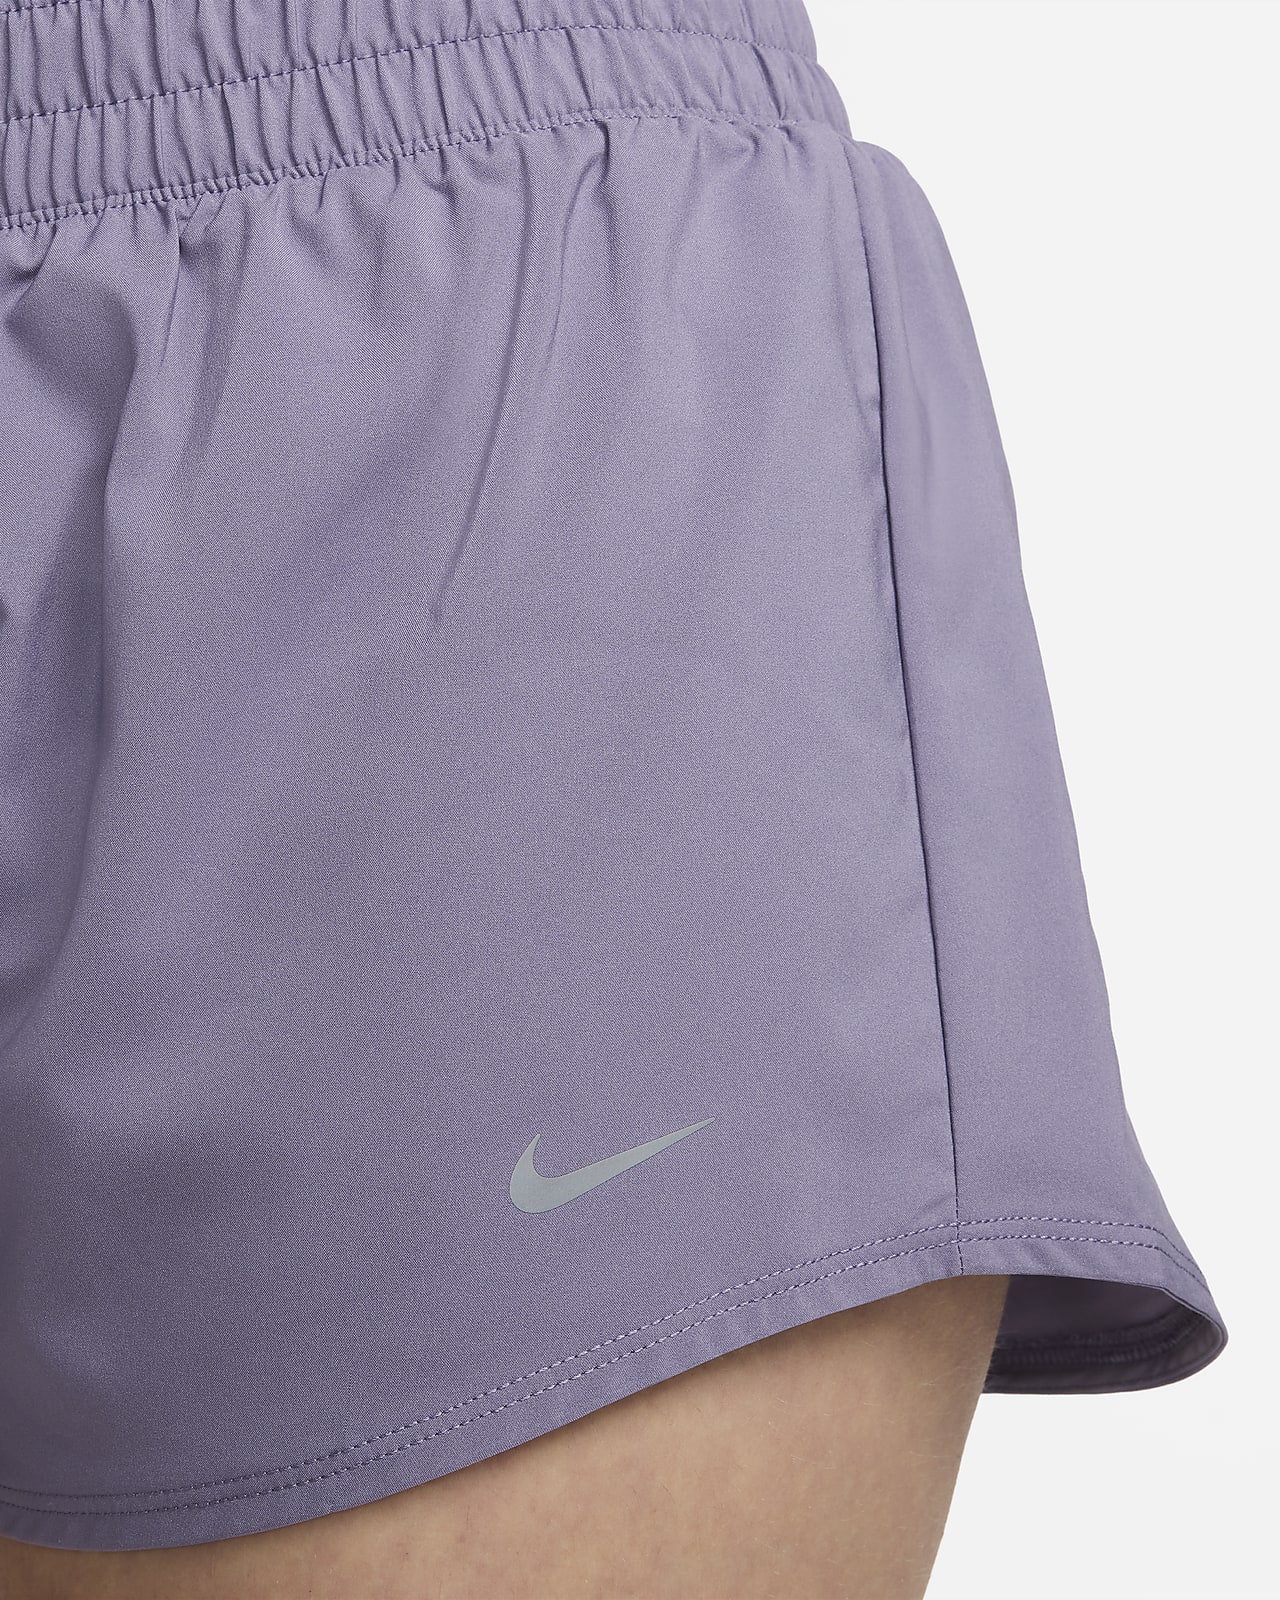 All In Motion UV Protection Athletic Shorts for Women